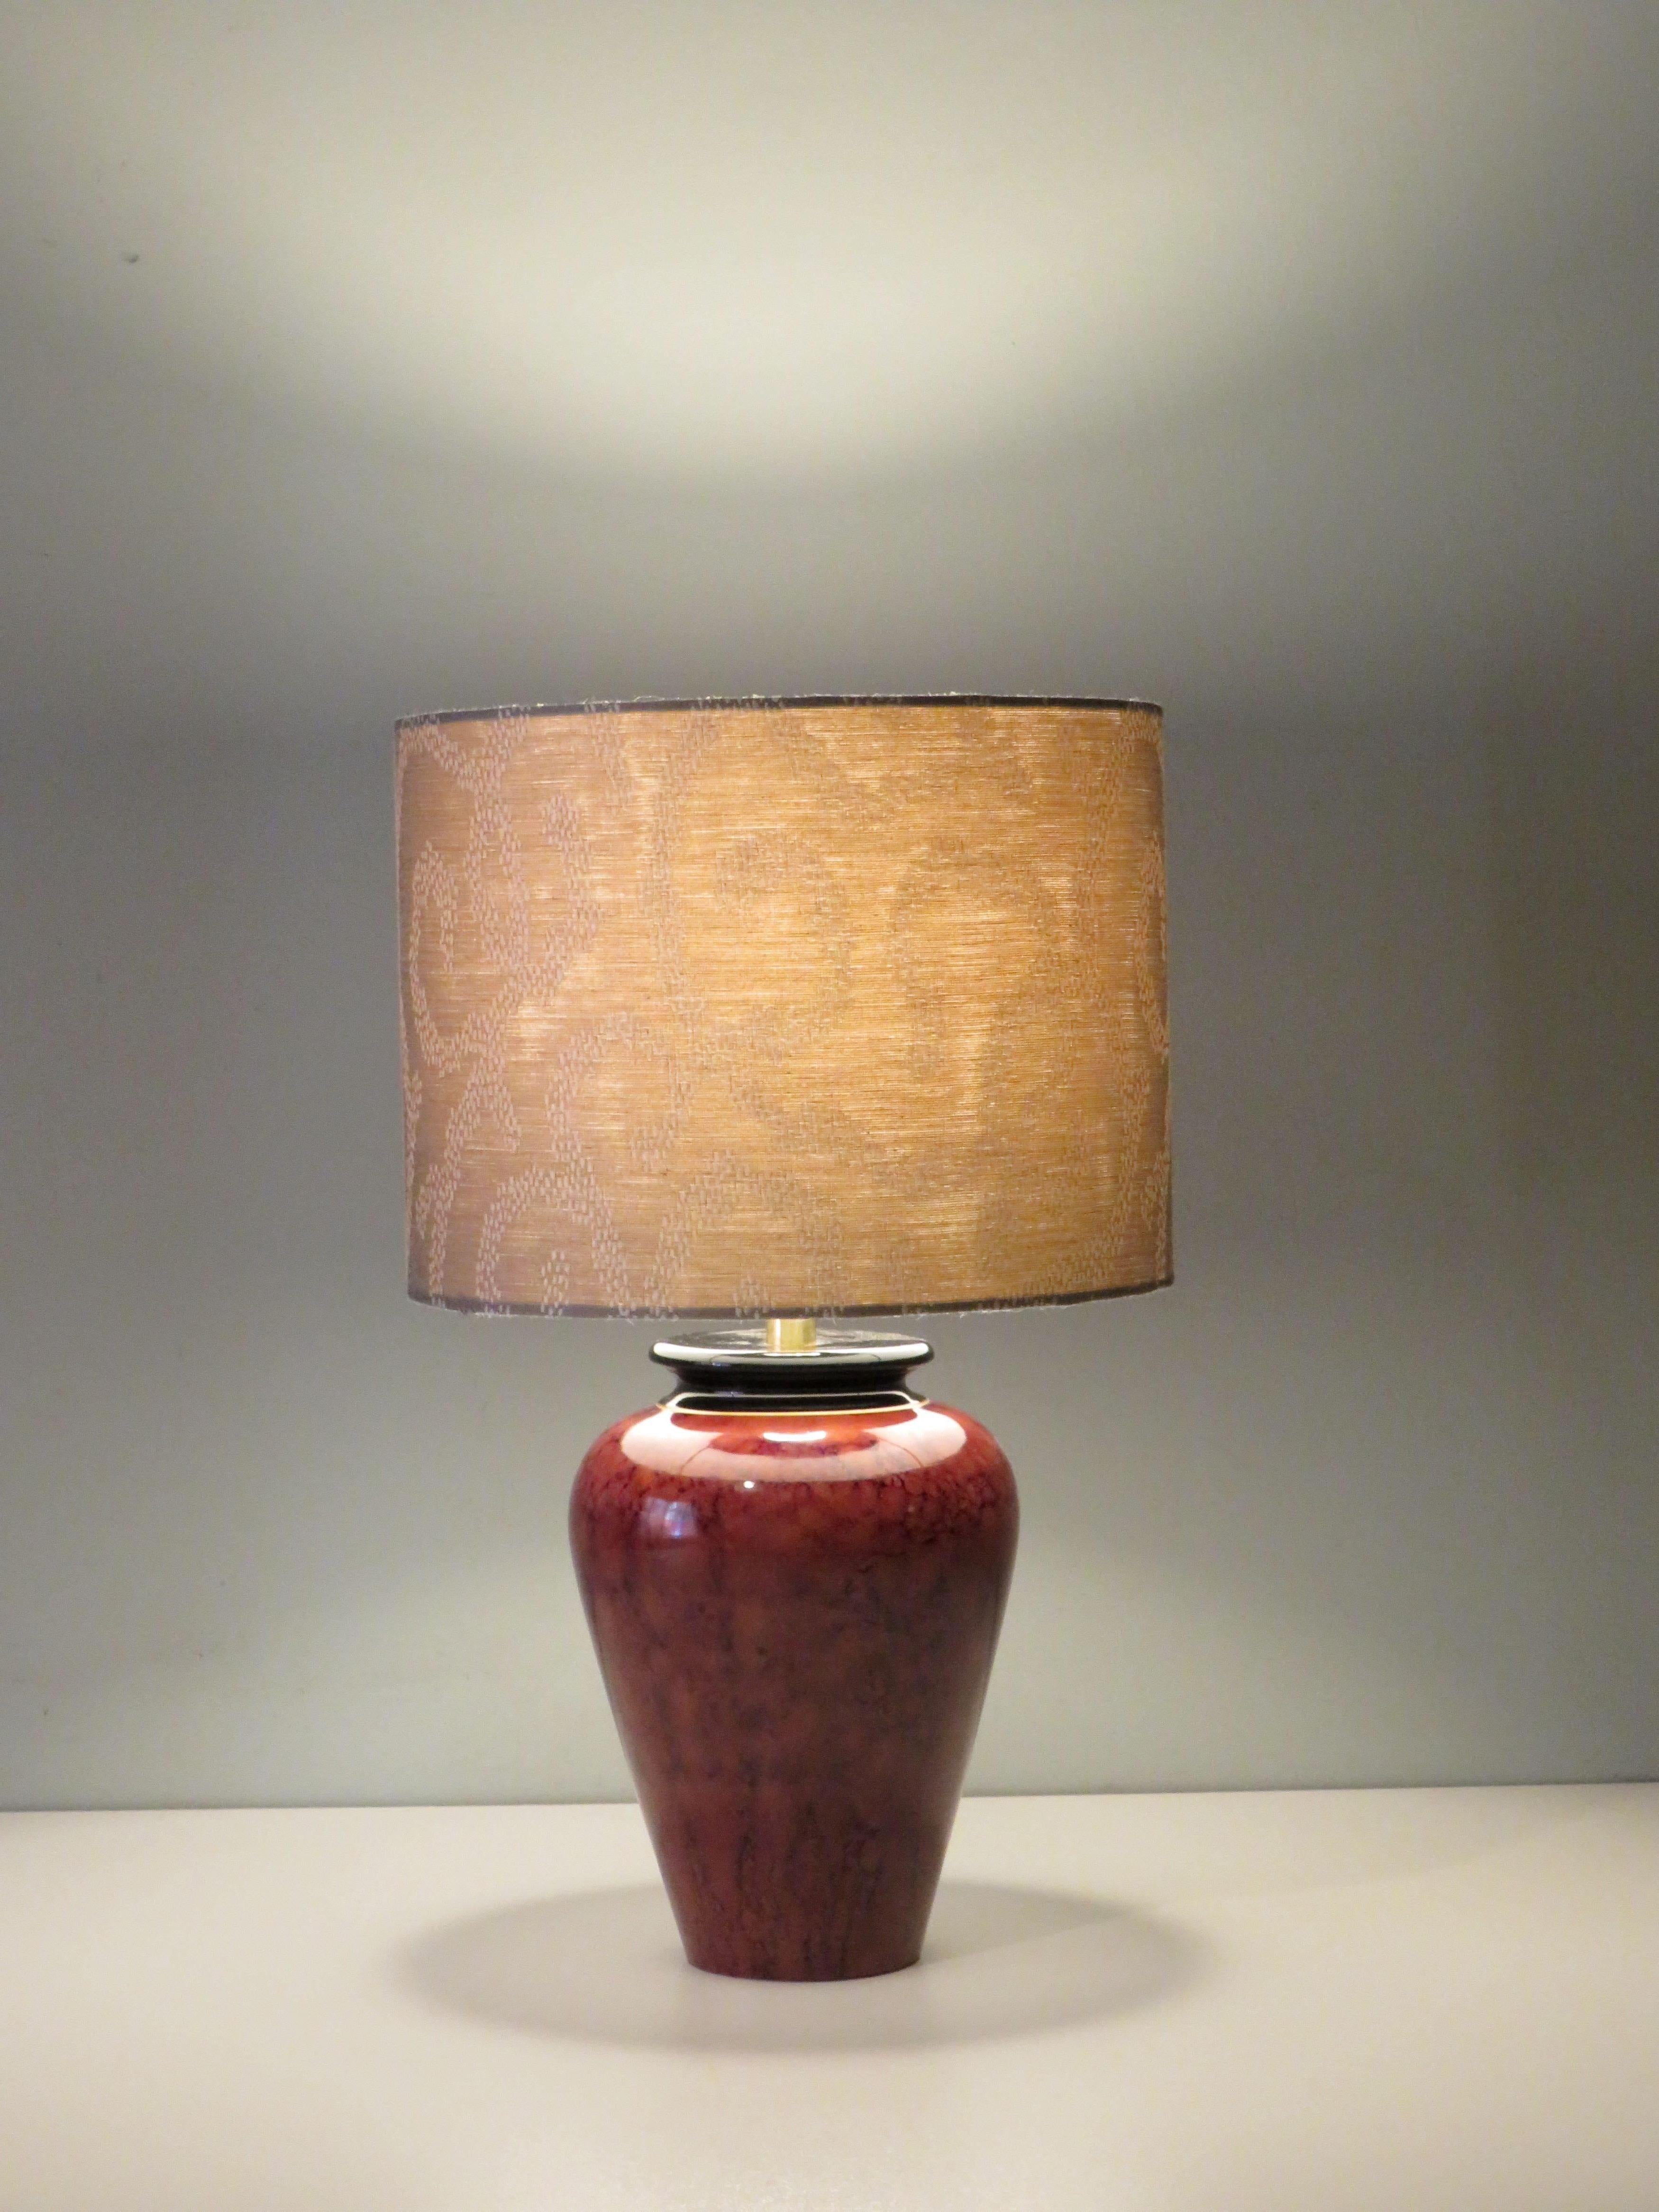 Vintage lamp base signed Louis Drimmer with custom-made lampshade in sand-colored jacquard fabric.
The table lamp has a gold-colored cord, on and off button and plug. There is an E 27 fitting and the table lamp is in working condition.
The height of